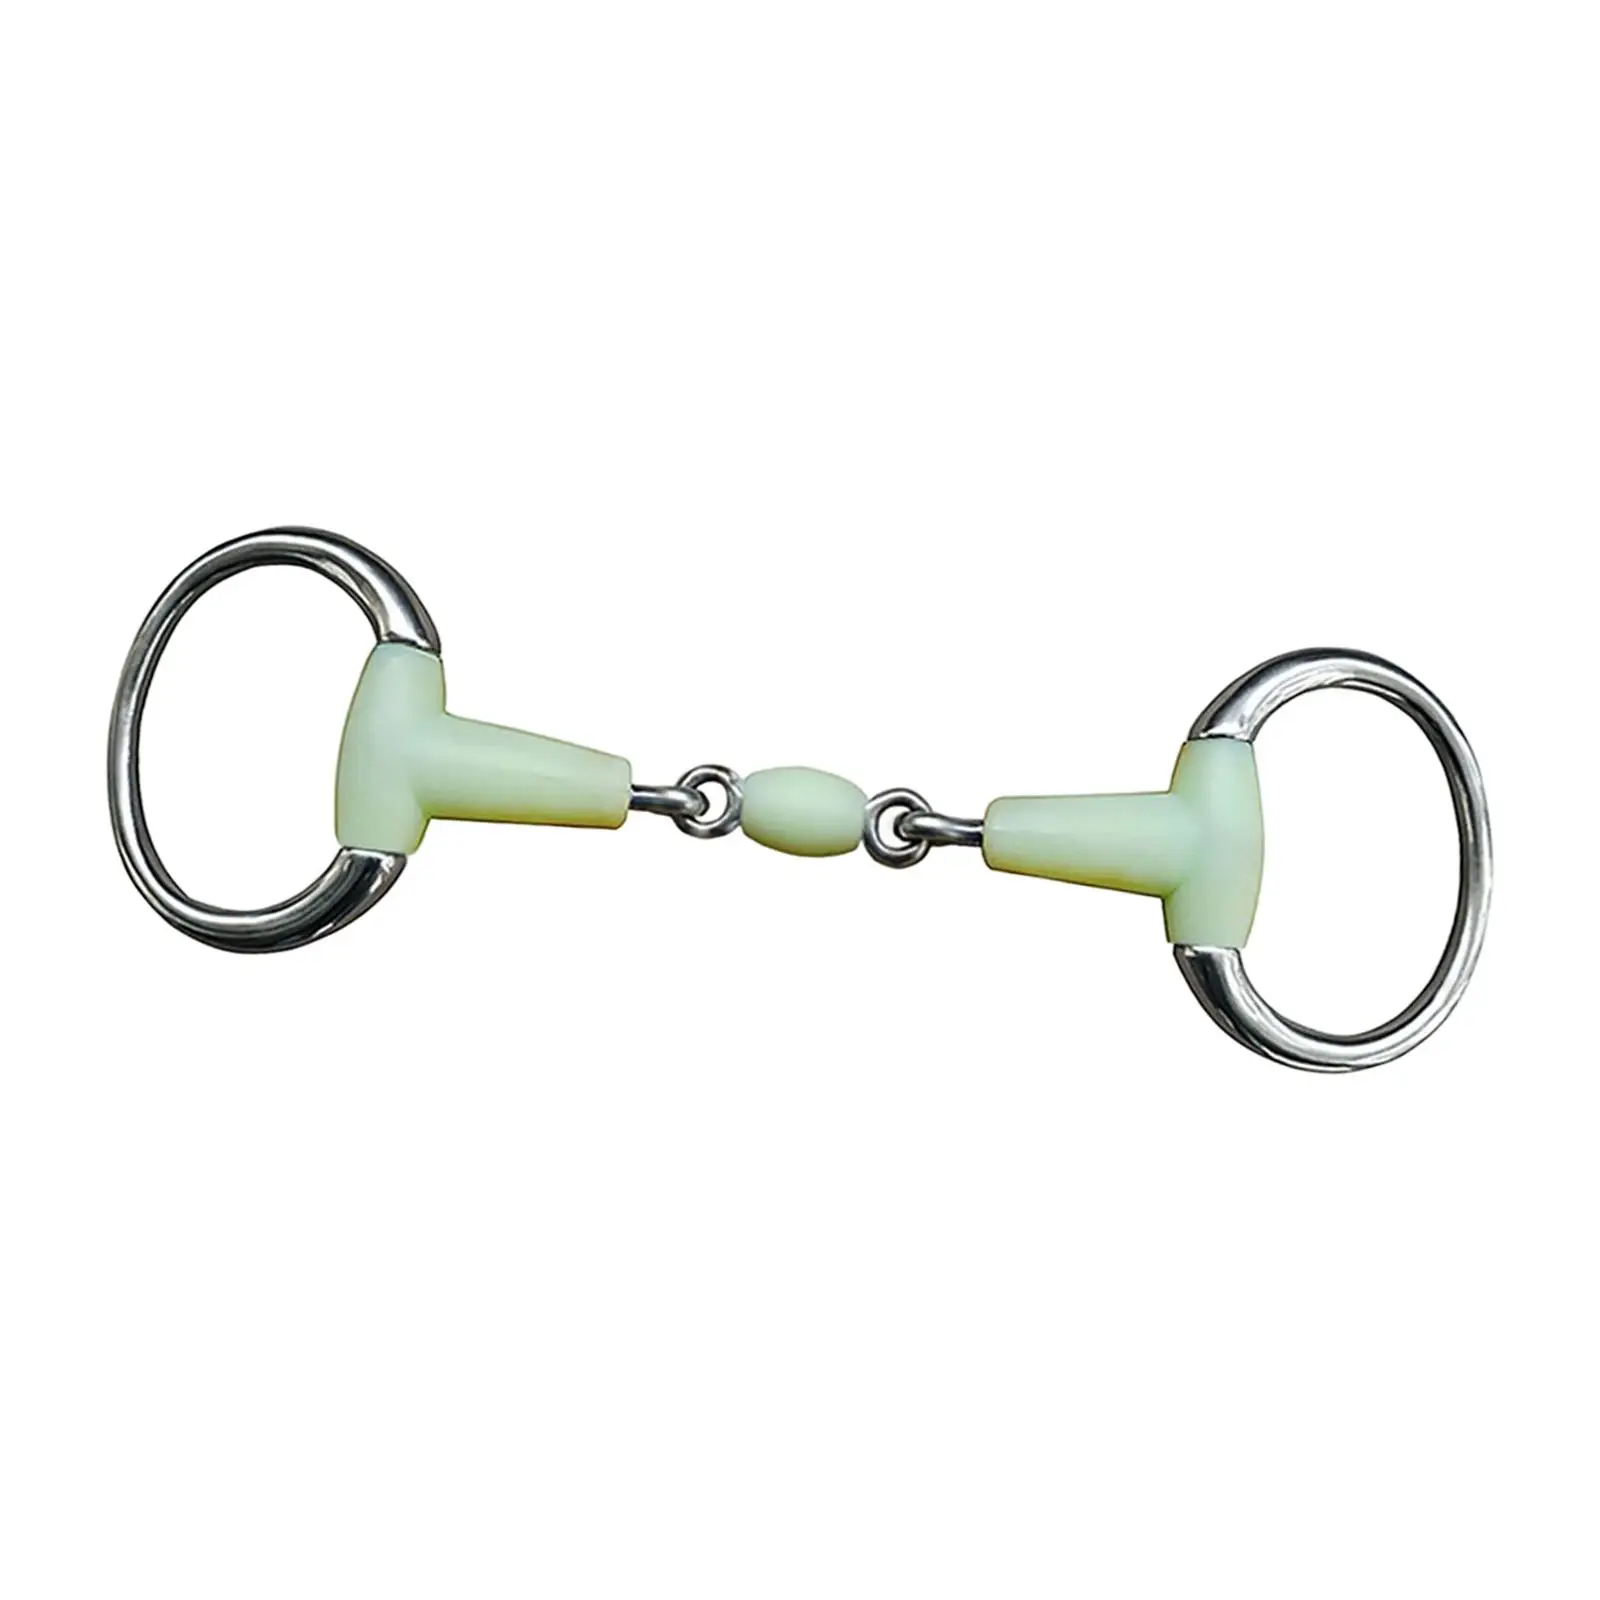 Horse Ring Bit Horse Training Equestrian Accessories for Outdoor Sports Horse Riding Equipment